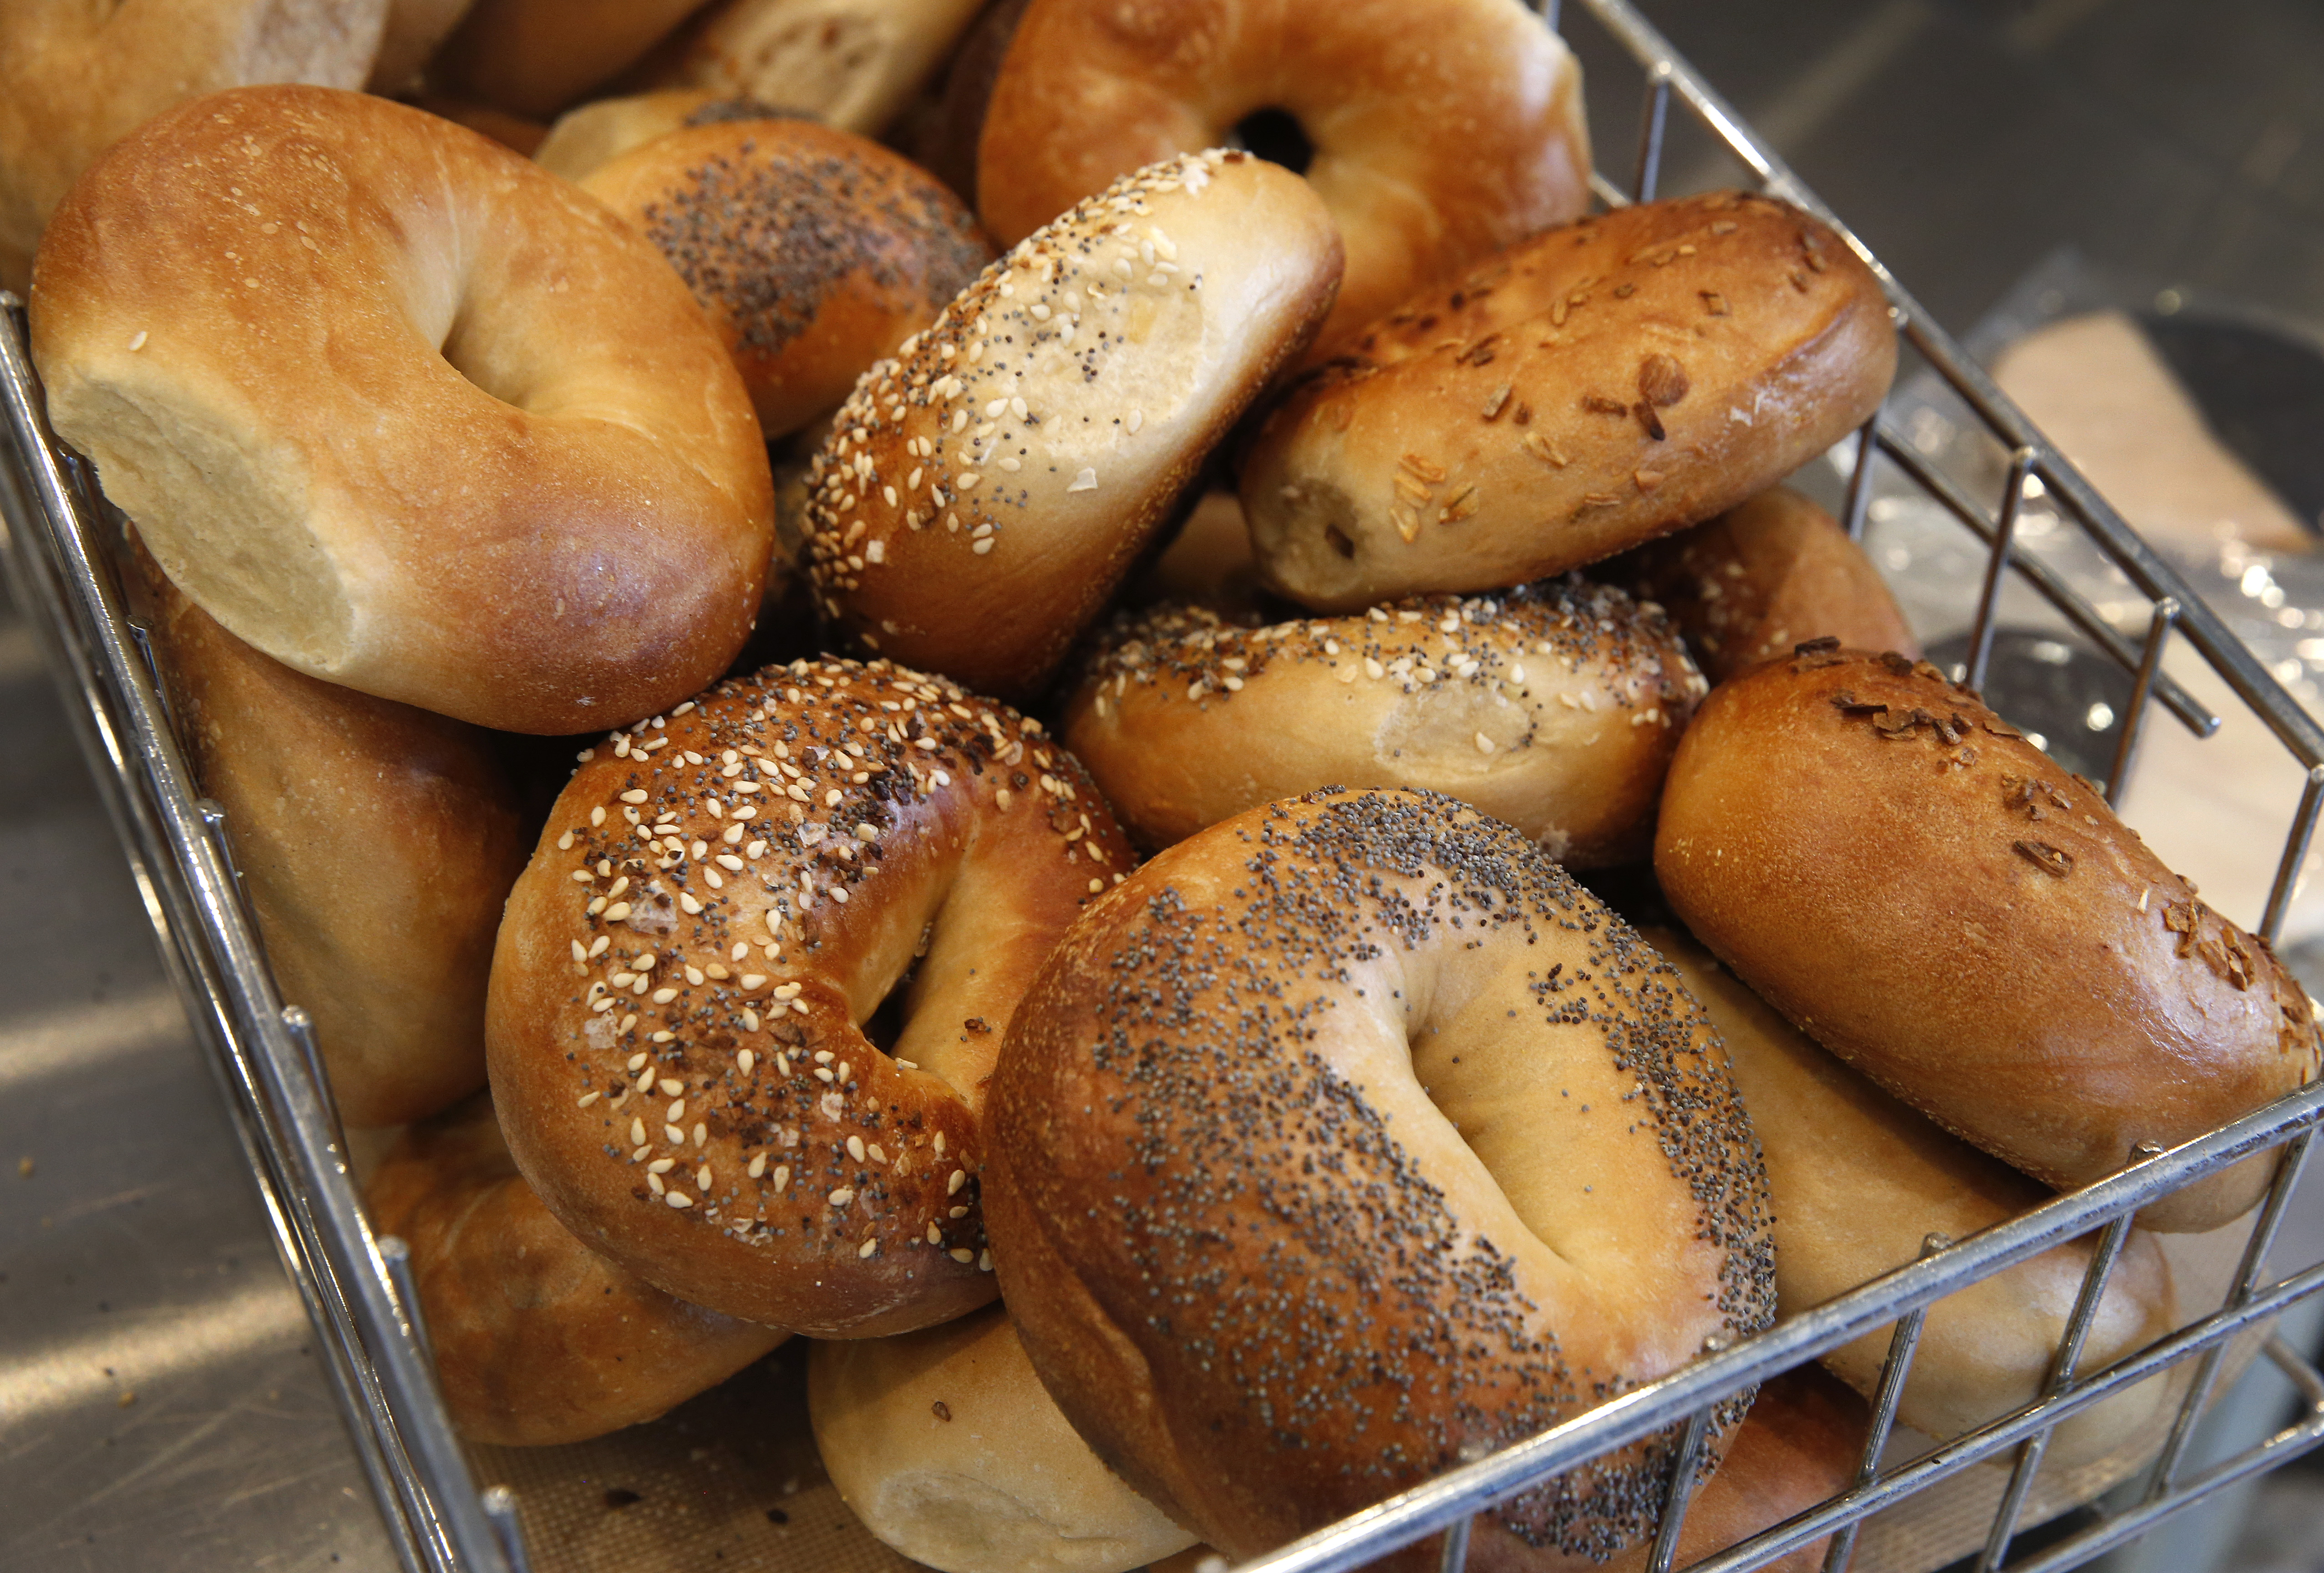 Bagels are fresh out of the oven at Boichik Bagels in Berkeley, Calif. on Wednesday, May 20, 2020. Business has remained strong at Boichik and other local bakeries during the coronavirus pandemic